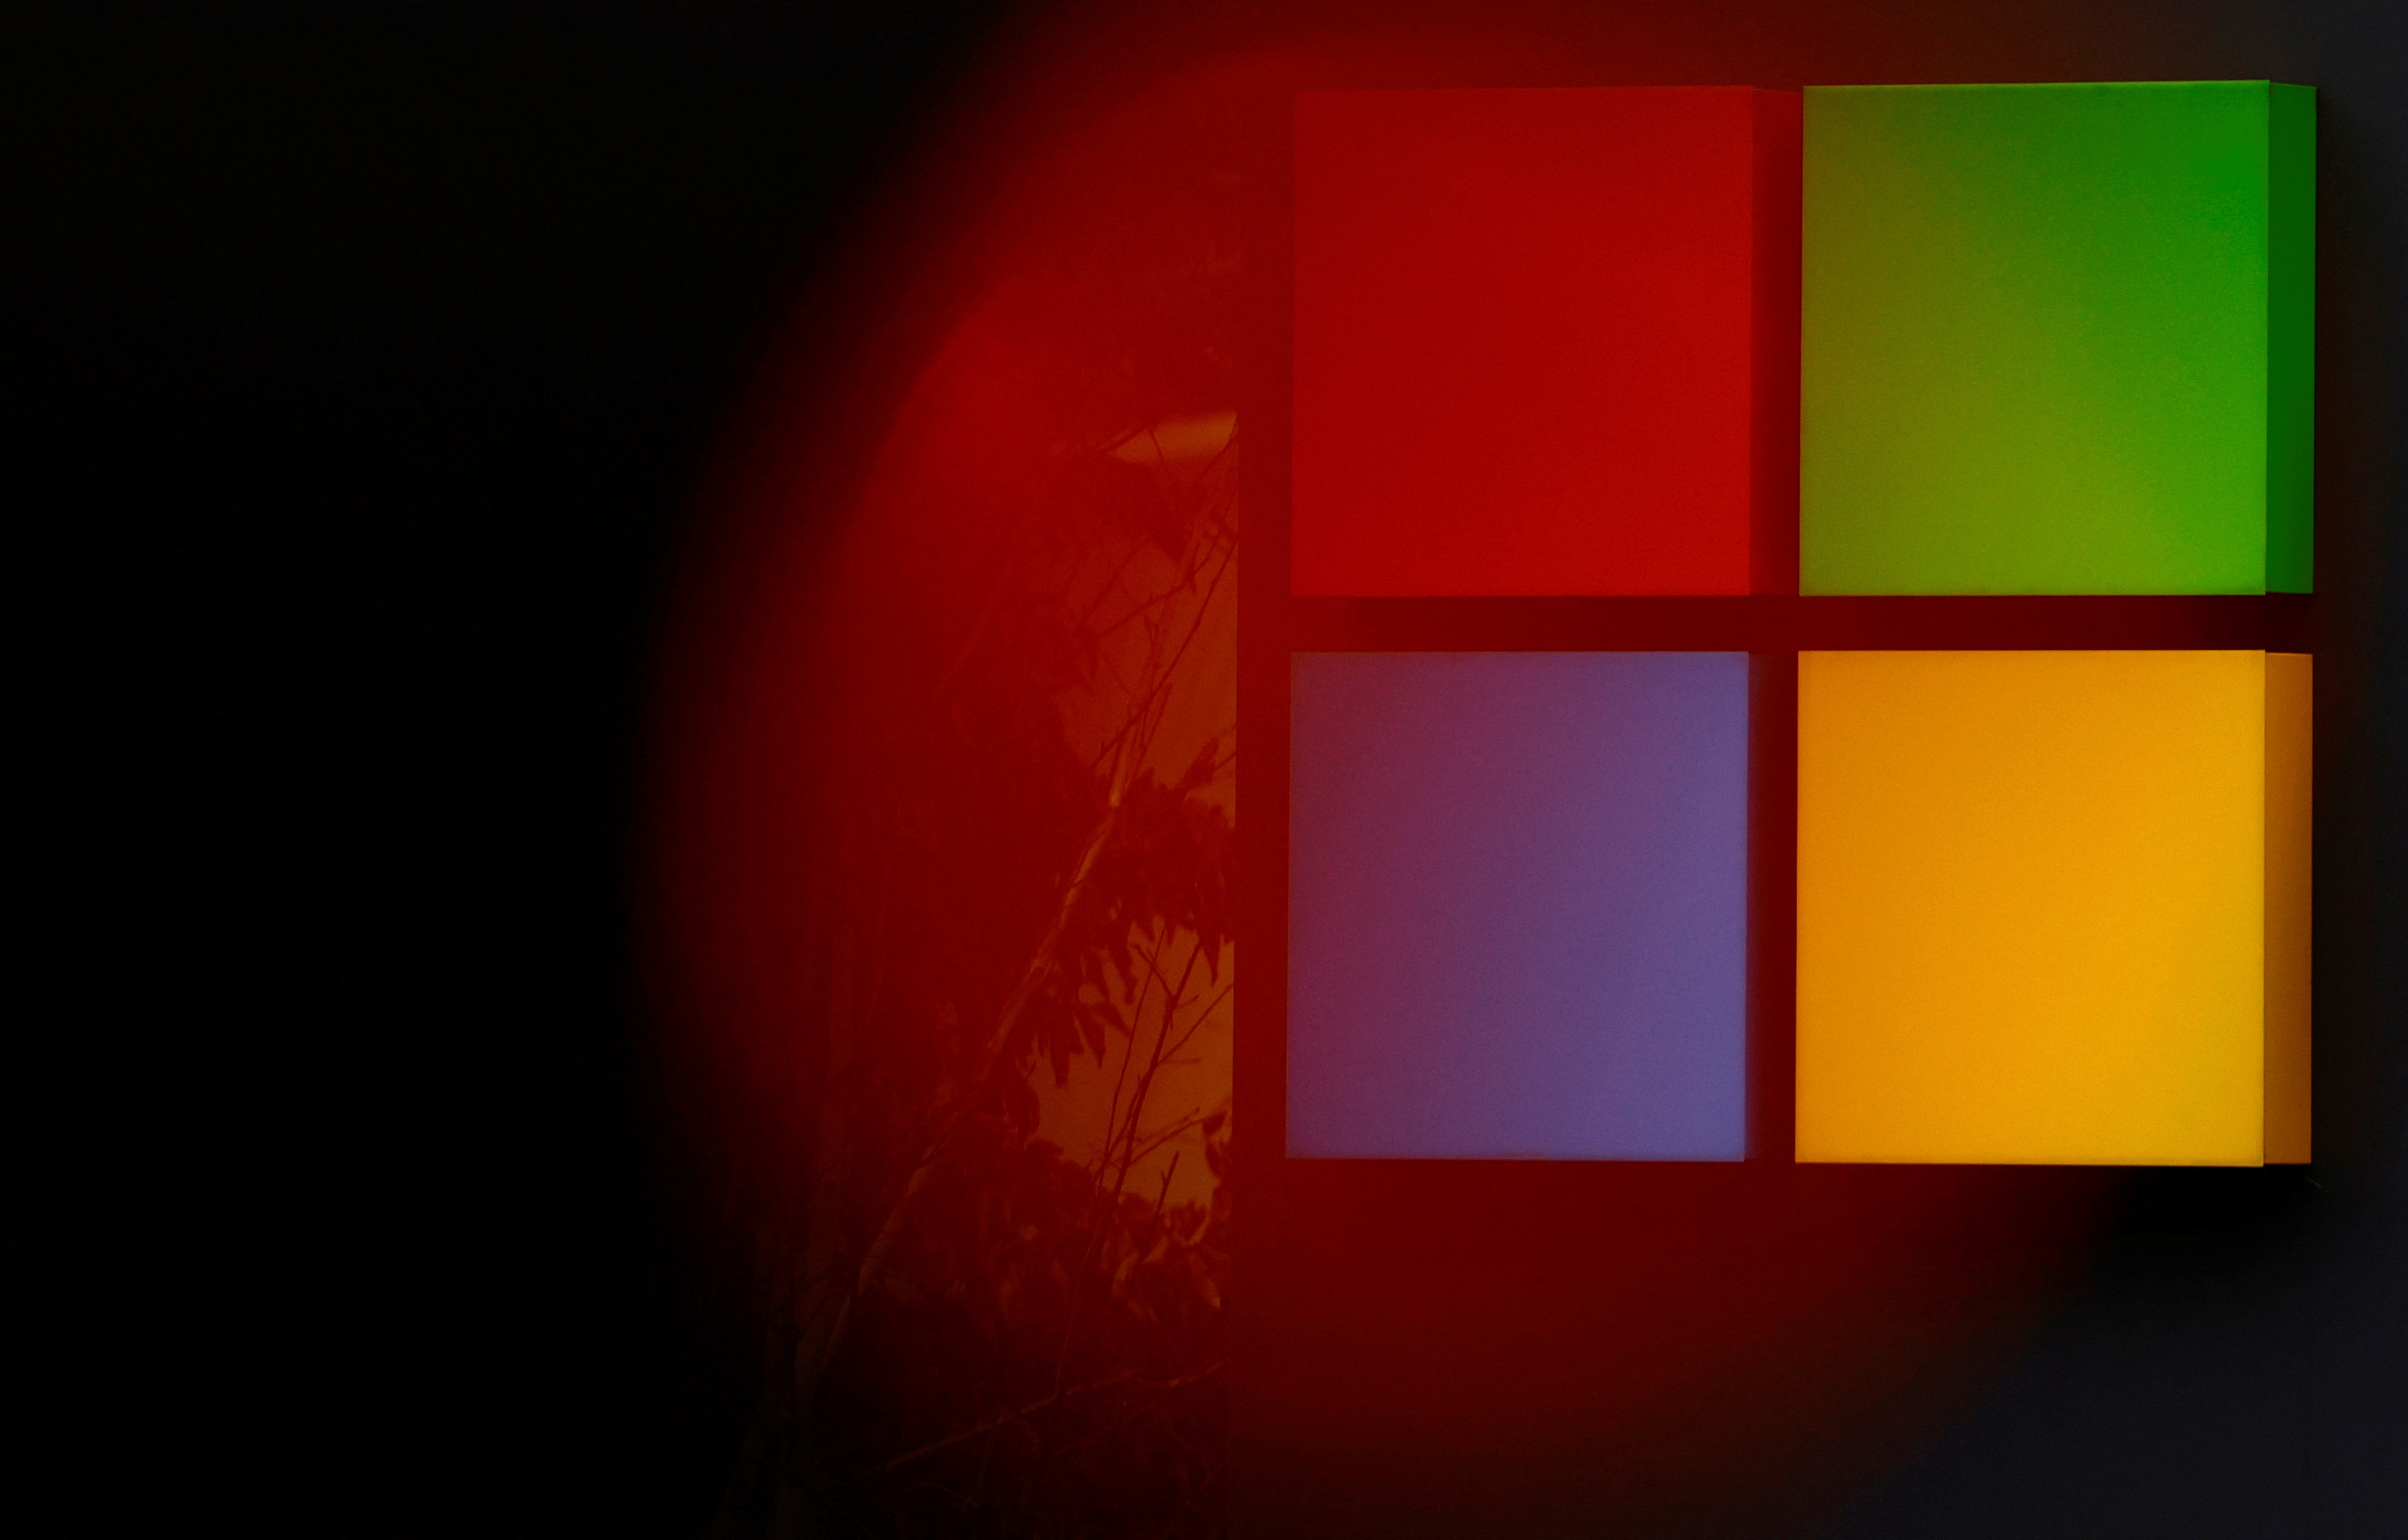 How to Get Windows 11 or Windows 10 for Free (or Under $20